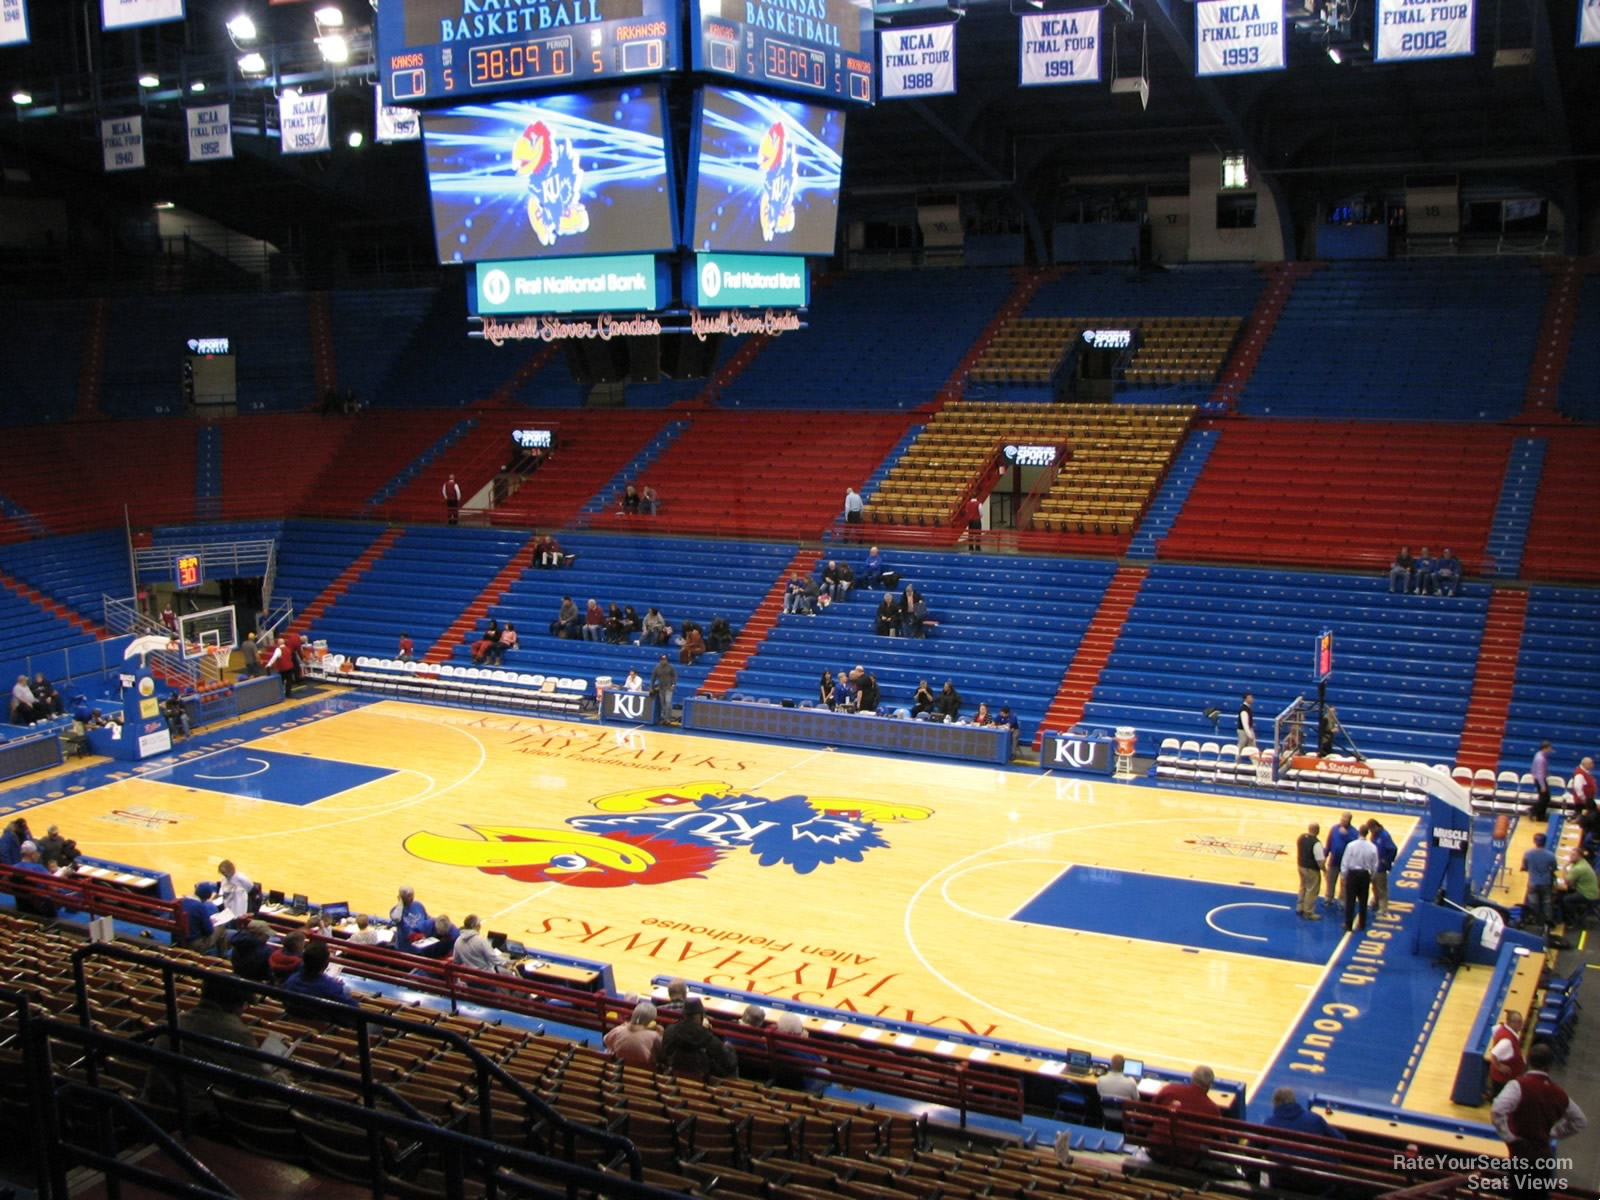 section 5, row 18 seat view  - allen fieldhouse